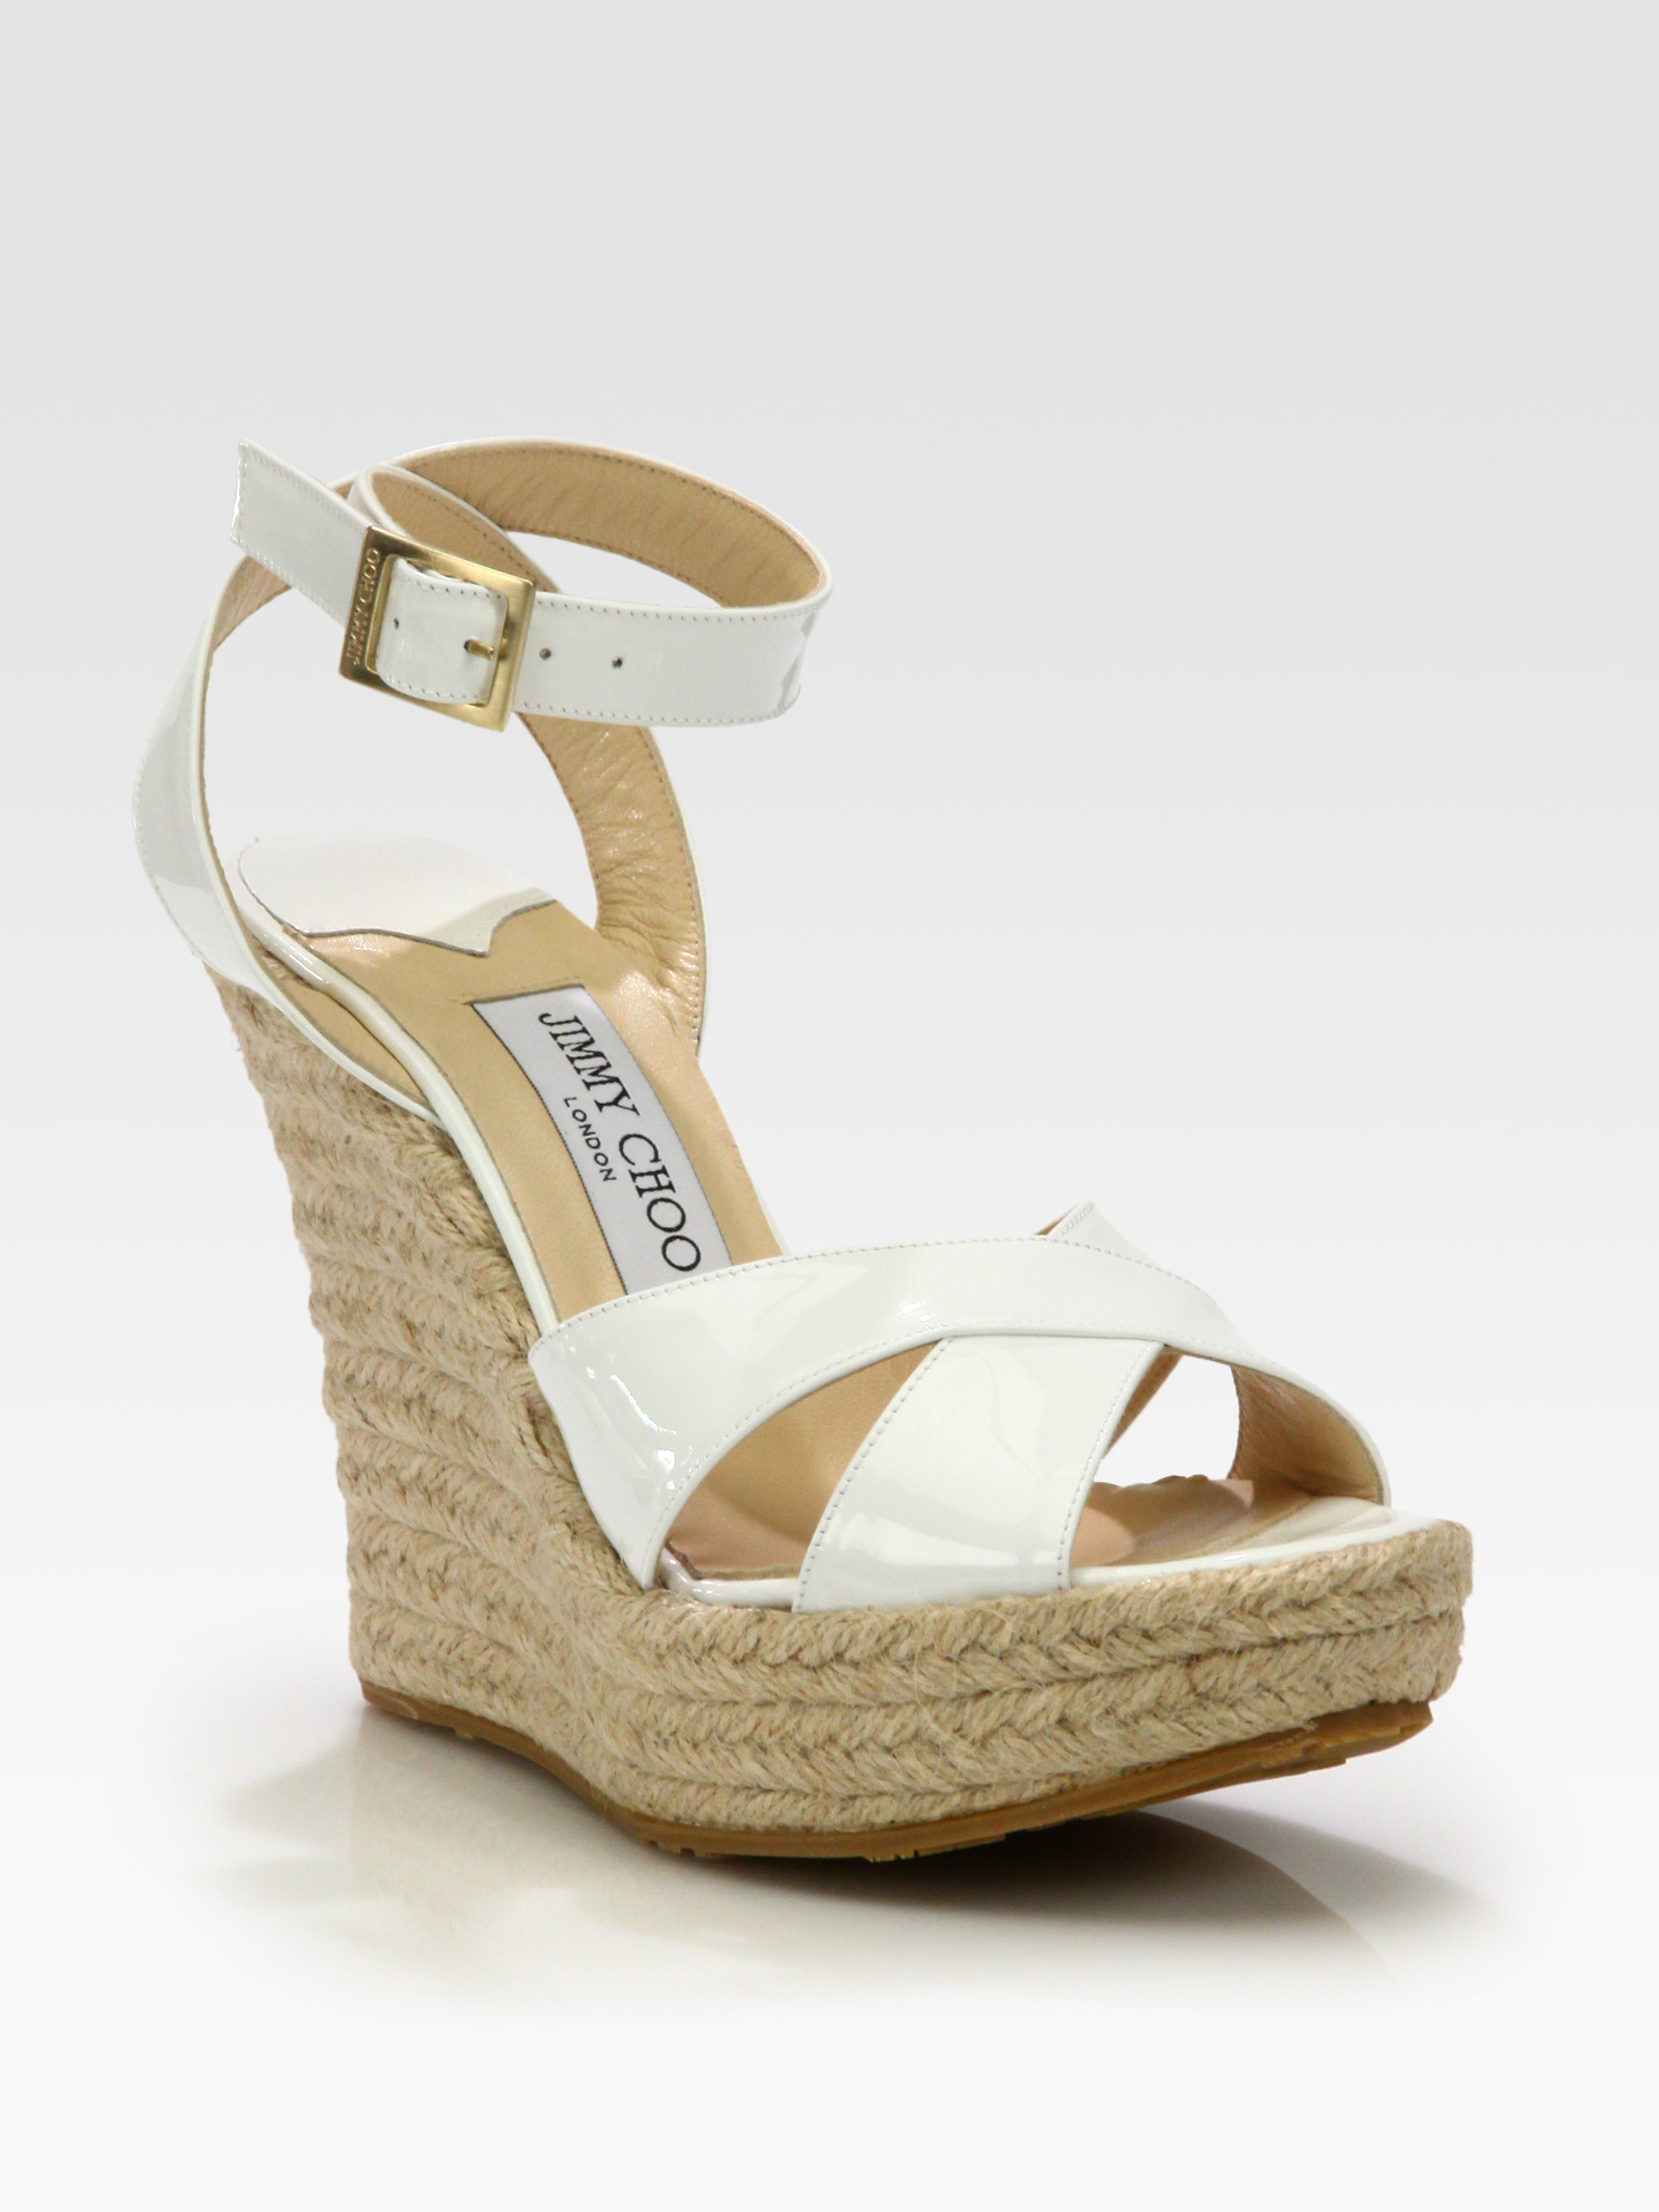 Jimmy Choo Pheonix Patent Leather Espadrille Wedge Sandals in (white ...